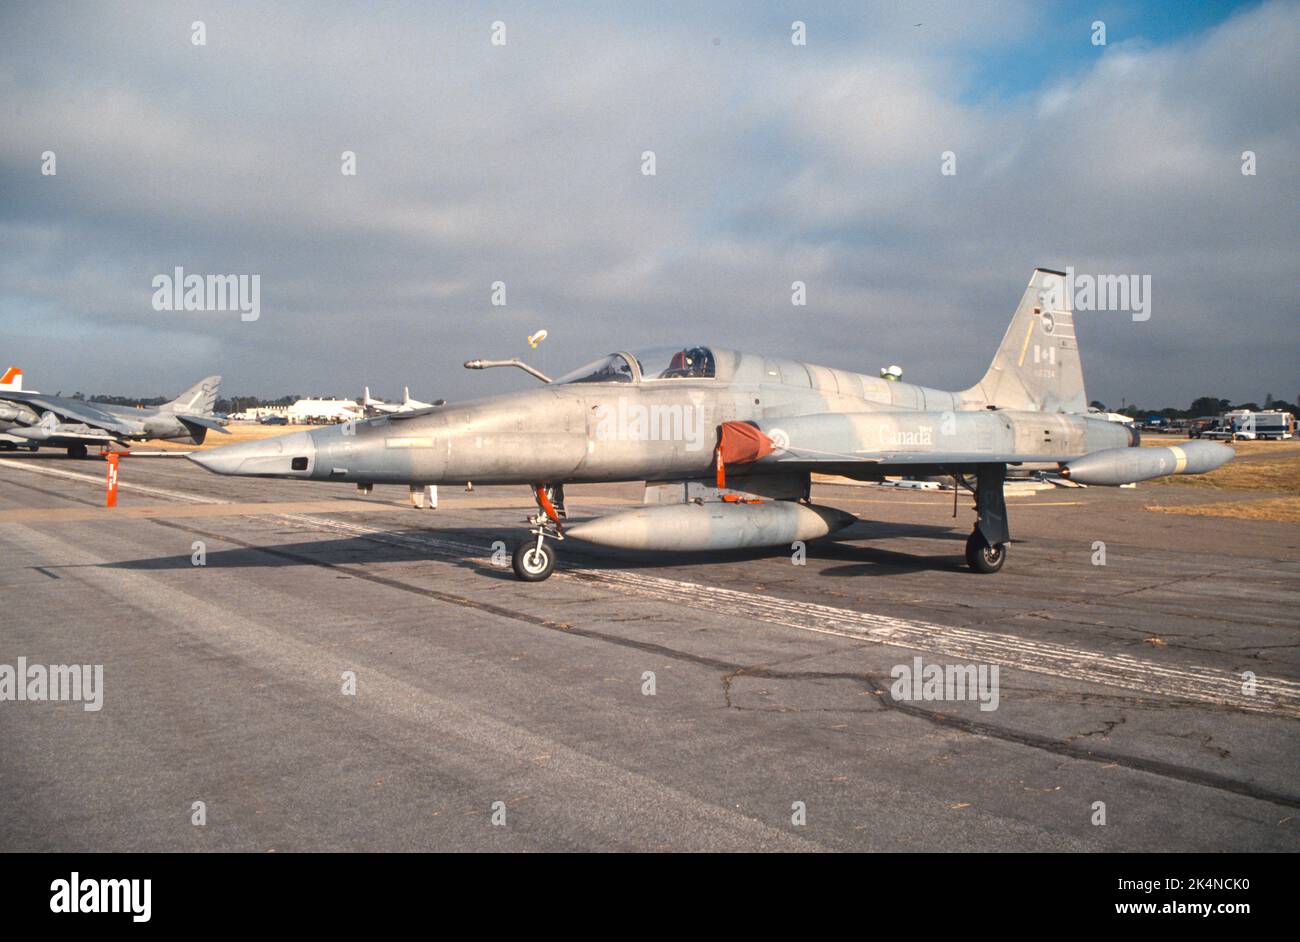 Northup F-5 from Royal Canadian Air Force displayed on the tarmac at an airshow Stock Photo